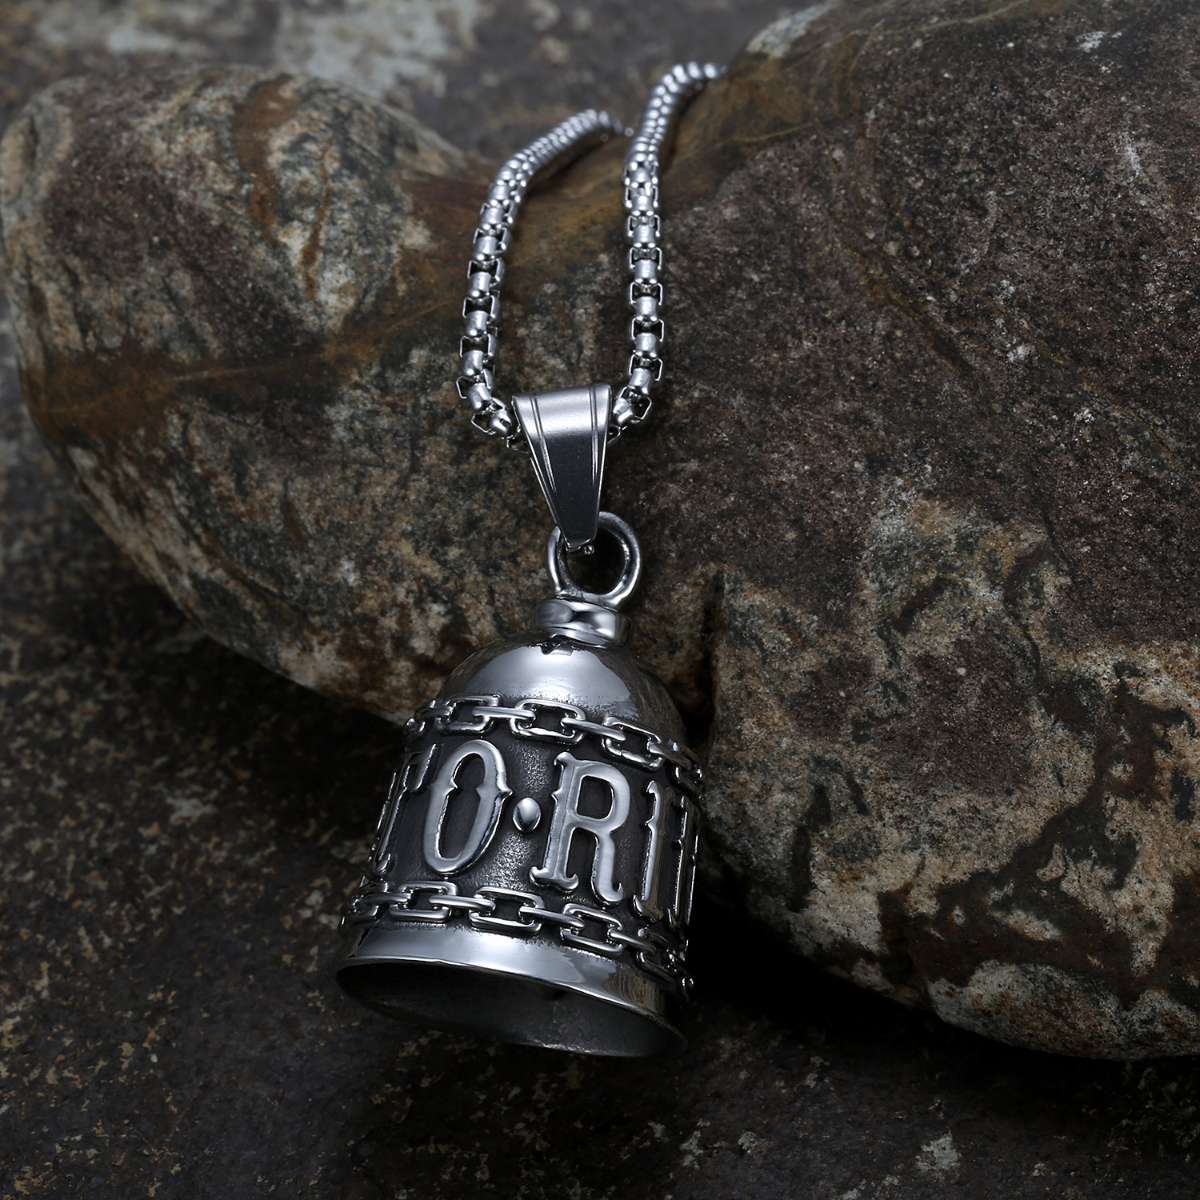 A Live to Ride Gremlin Bell with the word "orr" on it is sitting on a rock, serving as a Guardian Bell.